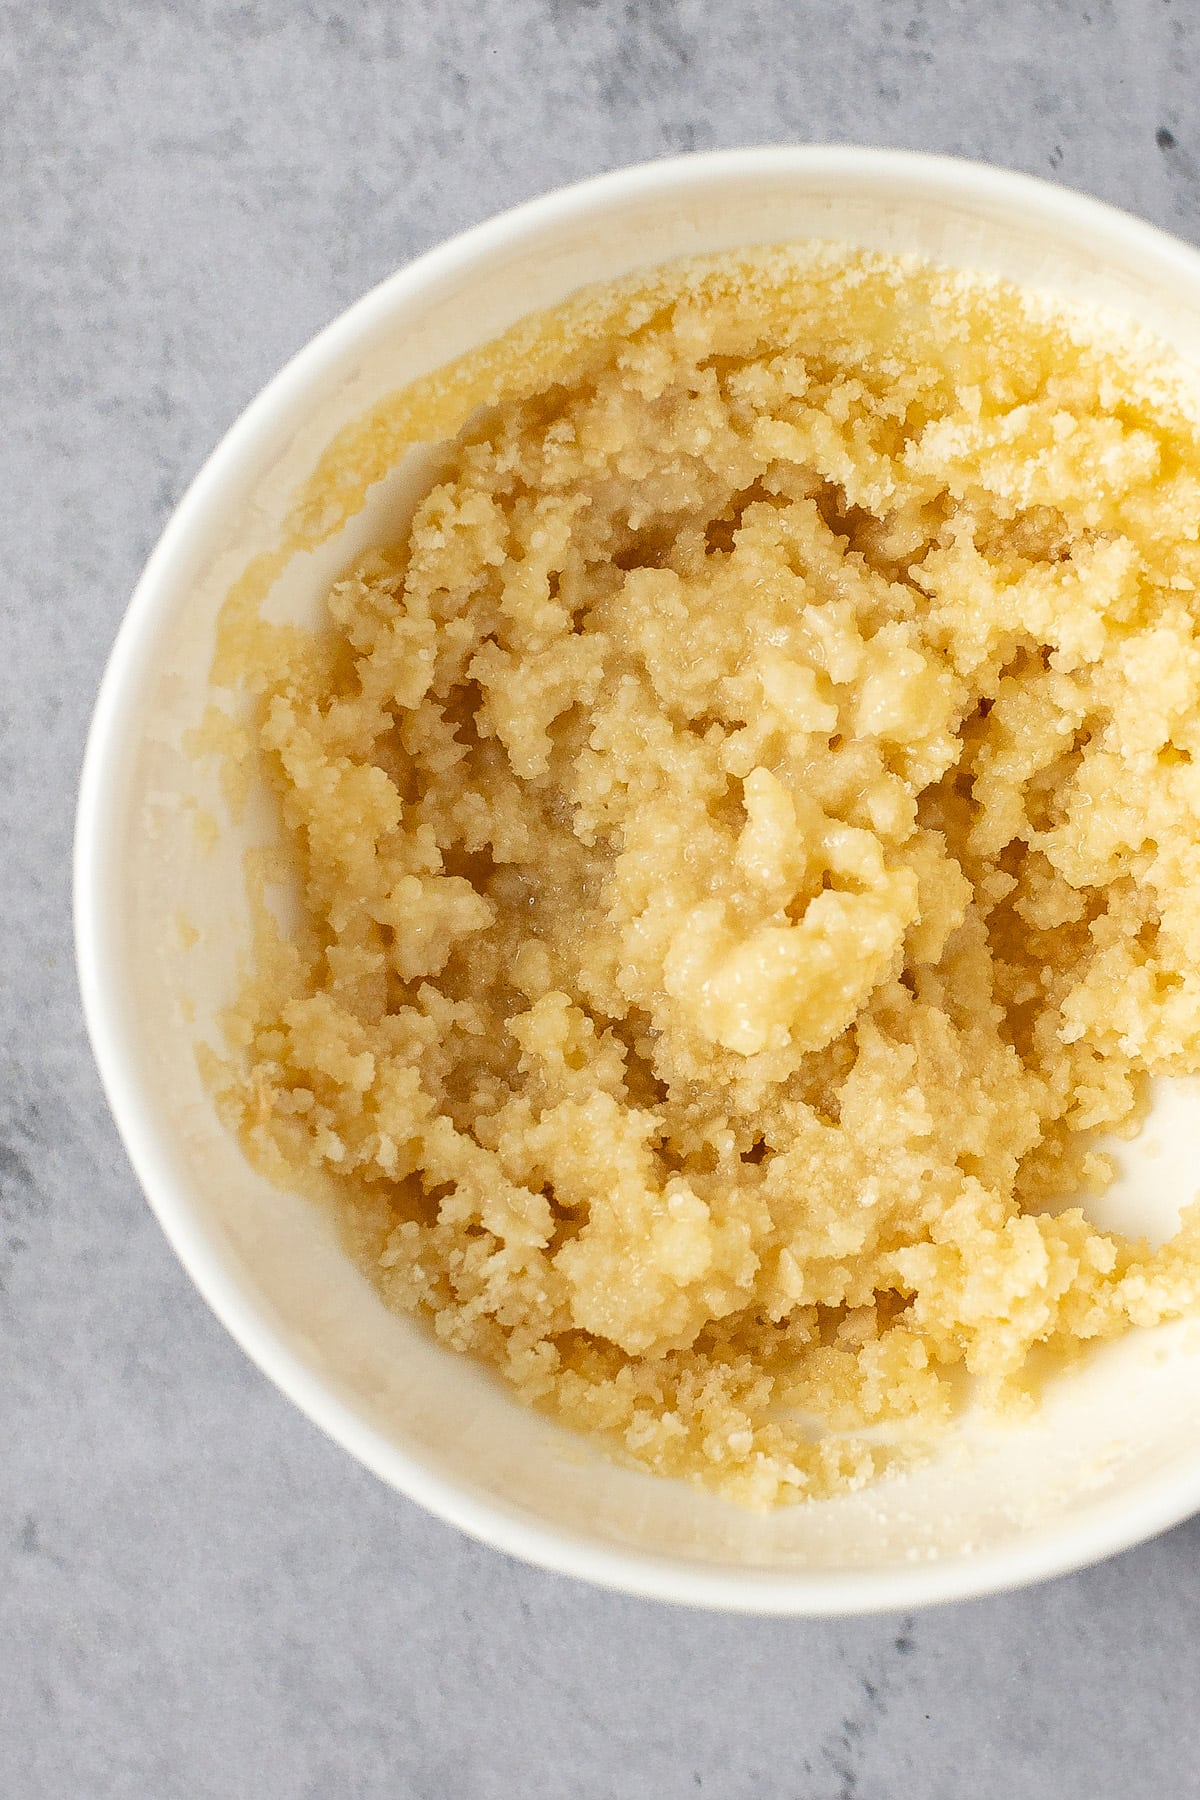 Breadcrumb topping mixed together in a small white bowl.